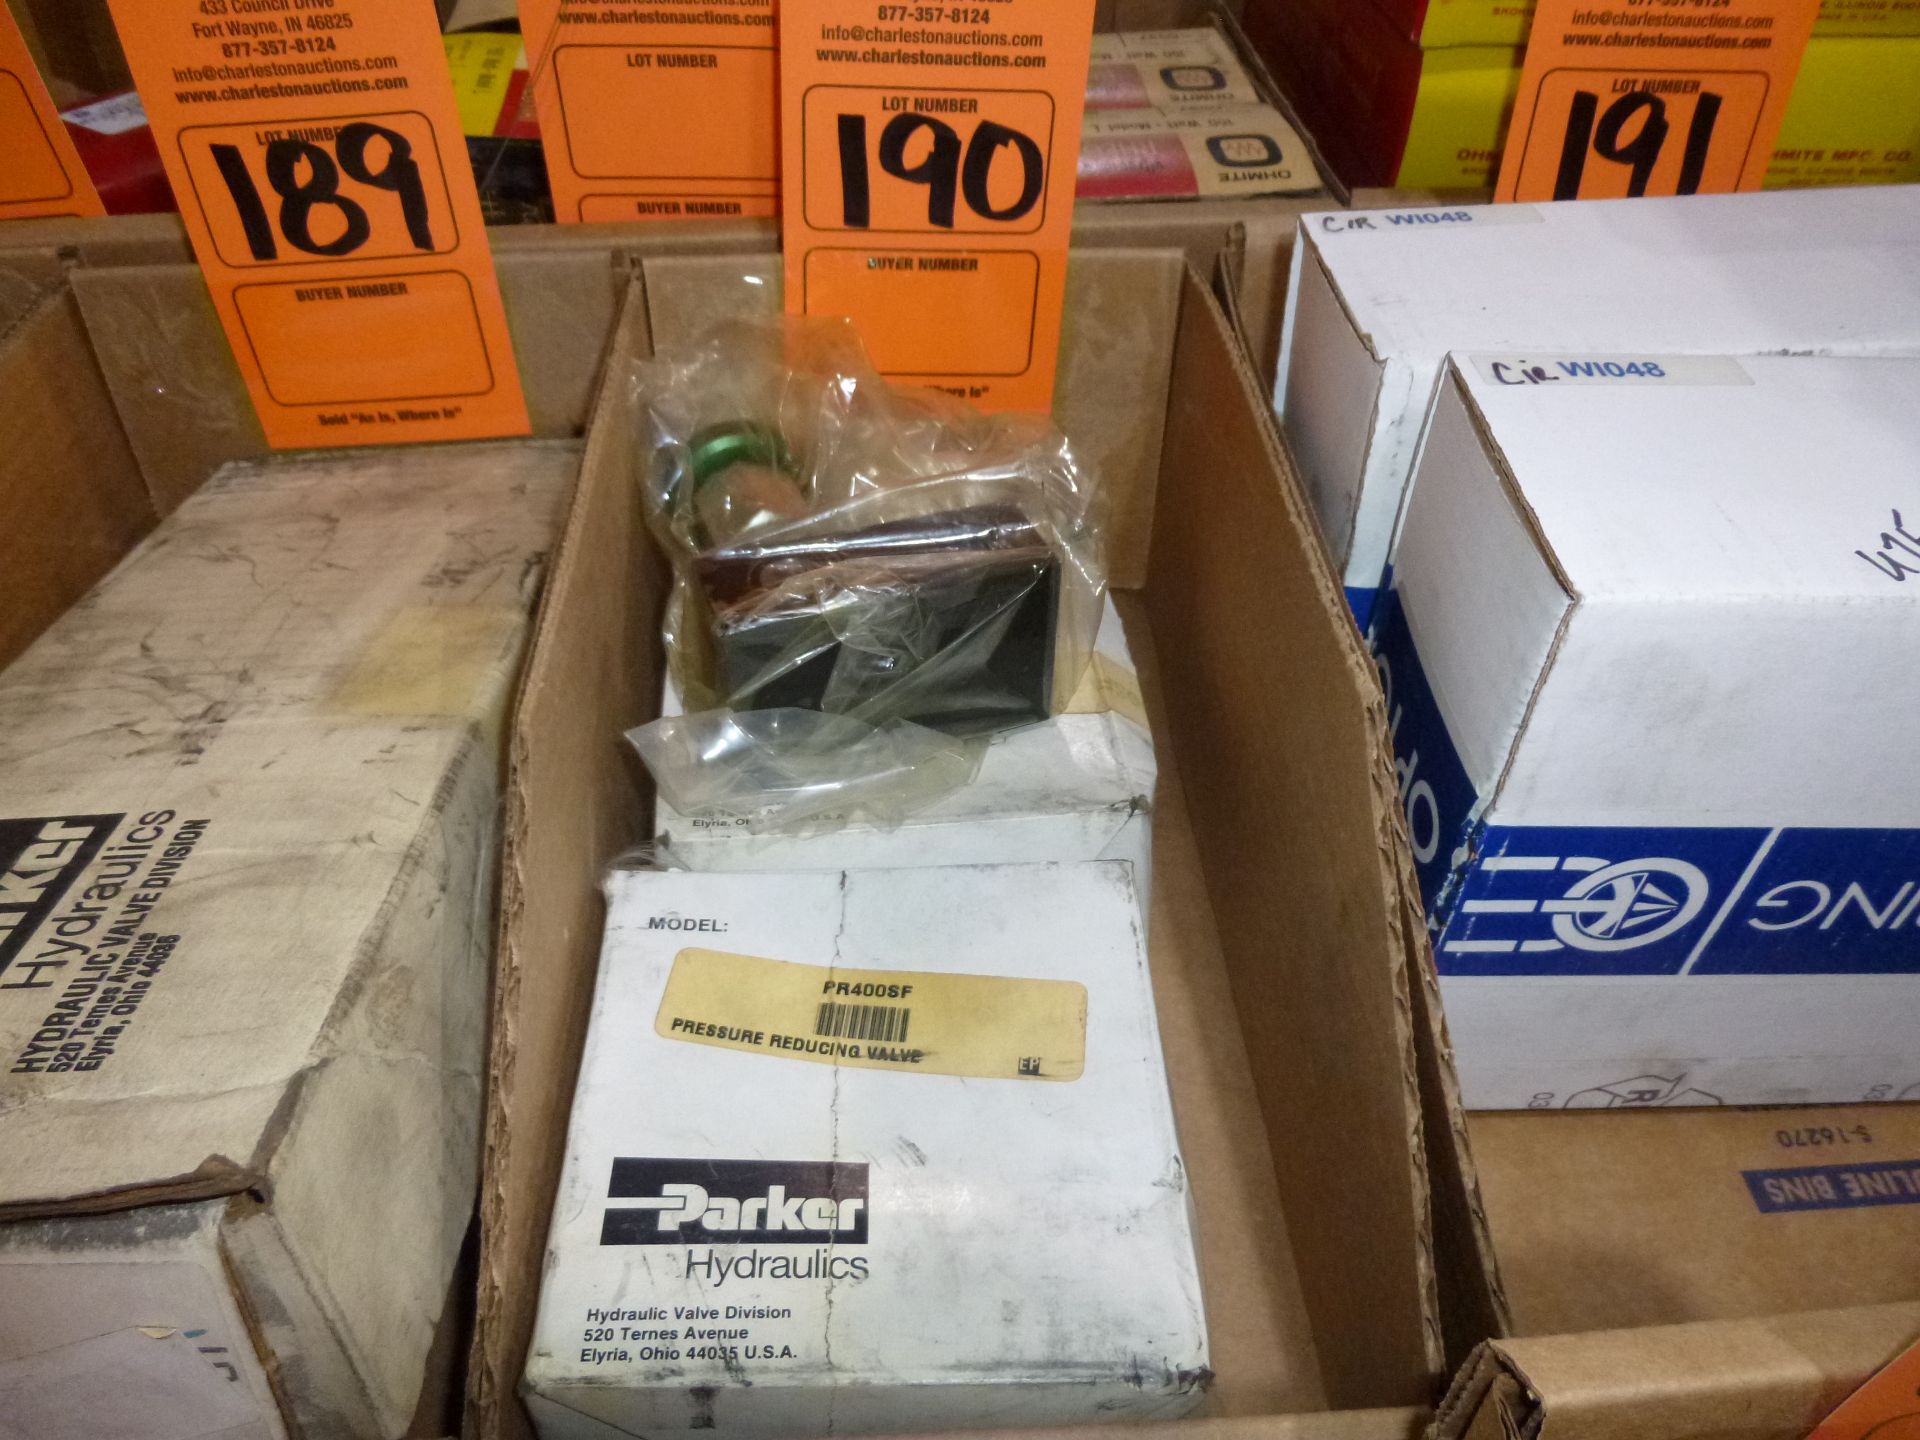 Qty 2 Parker pressure reducing valve model PR400SF, new in boxes, as always with Brolyn LLC